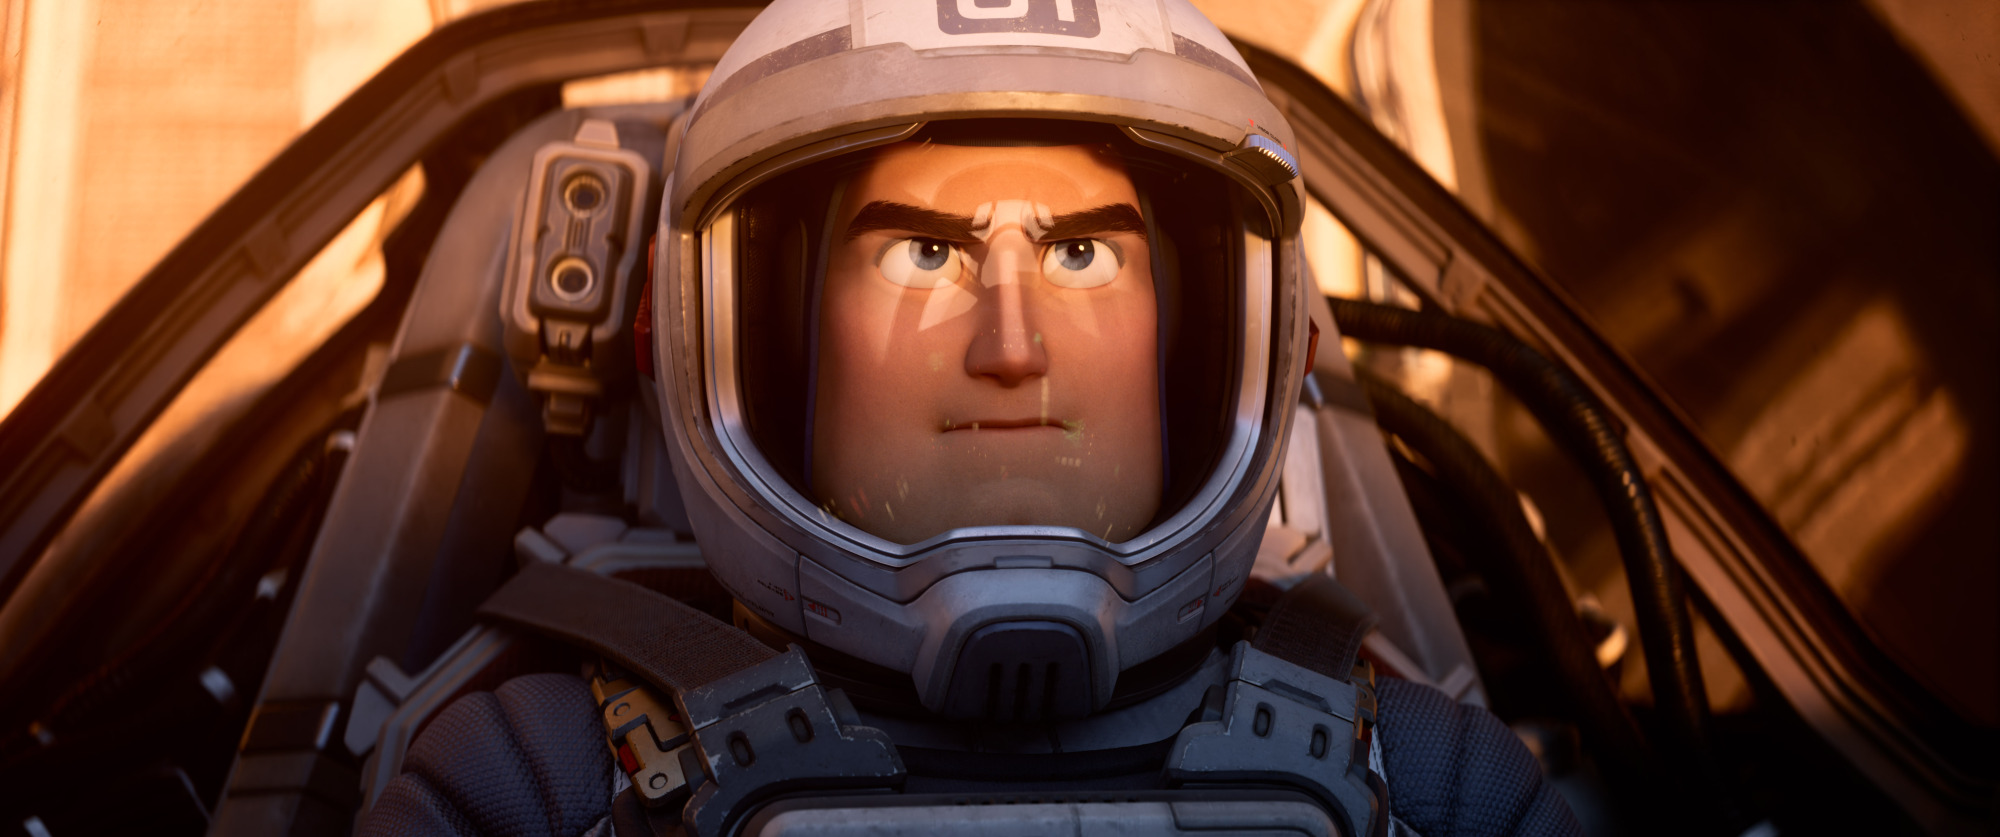 A man in a spacesuit sits in the cockpit of a spaceship.